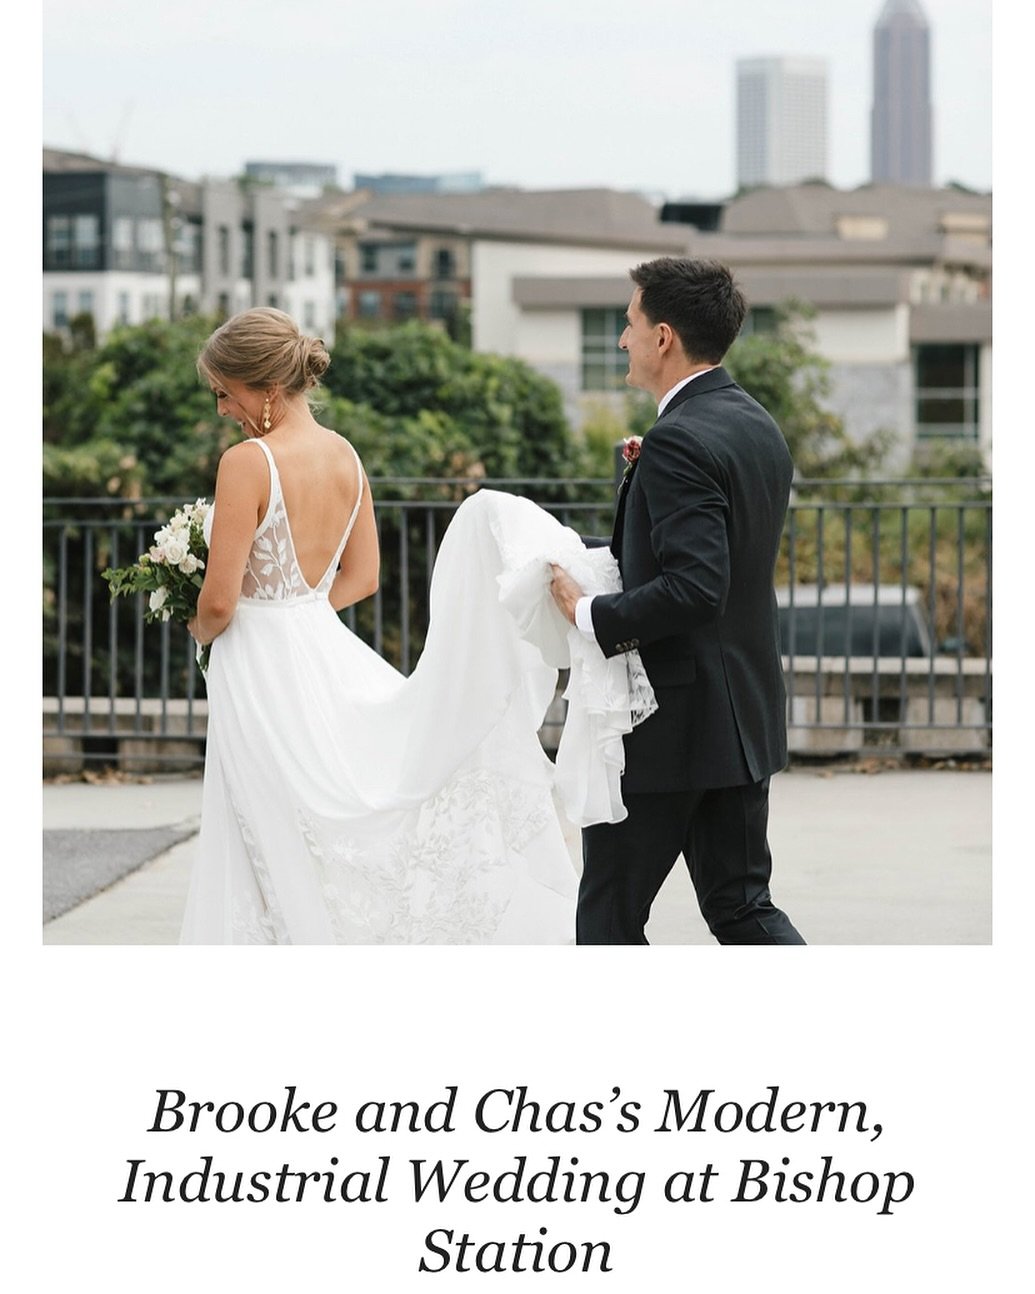 New Blog Post | Brooke and Chas&rsquo;s Modern, Industrial Wedding at Bishop Station

This wedding was absolutely gorgeous, we just had to share it on the blog! If you are looking for inspiration for a modern/industrial wedding, look no further!

Cli